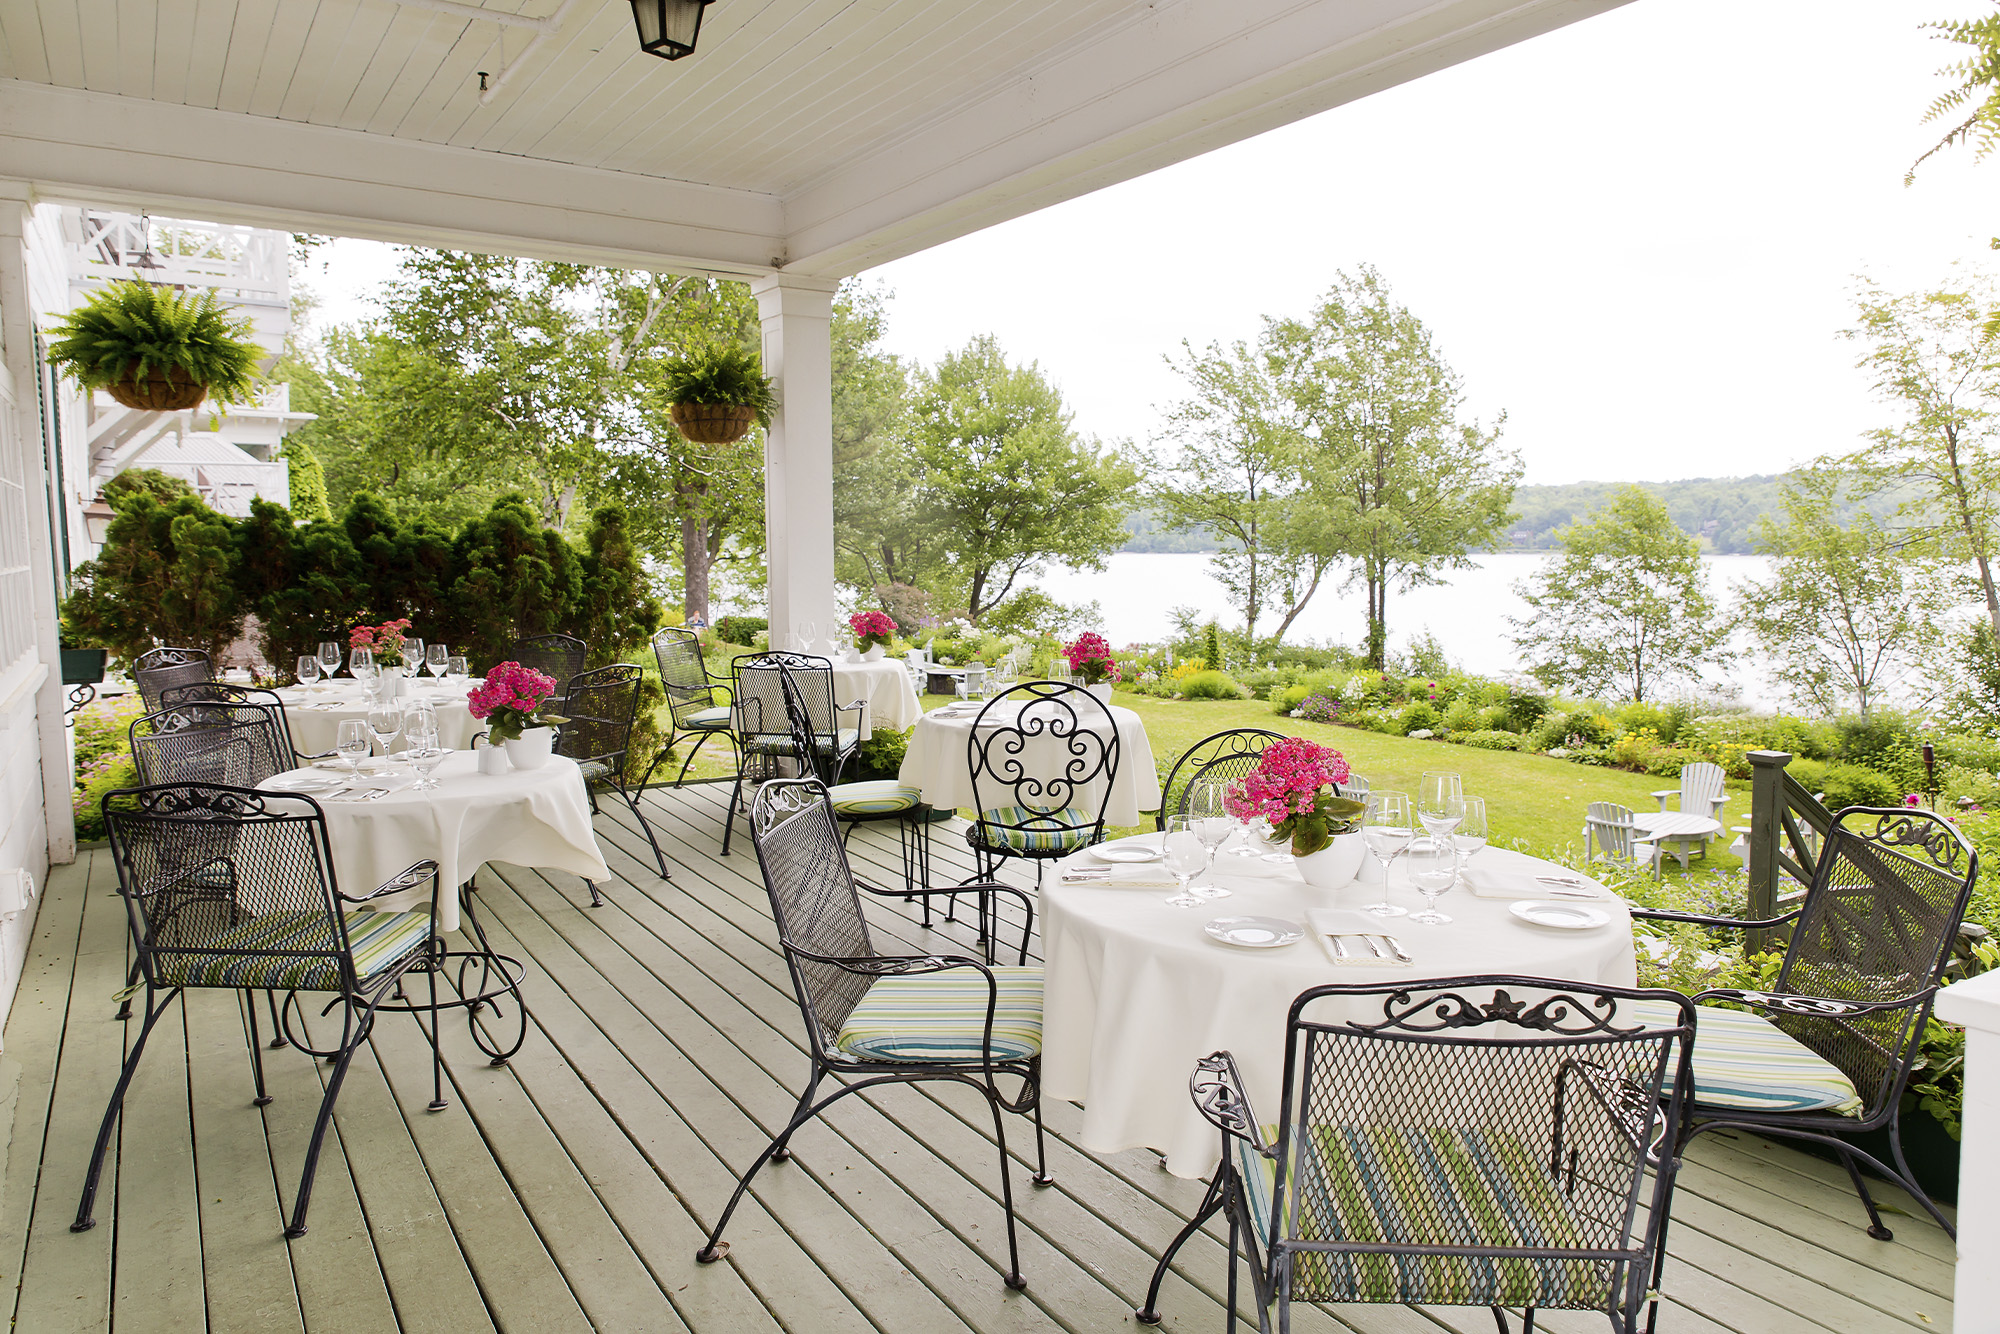 Le hatless patio wired black chairs and white tablecloths look out to view of lake